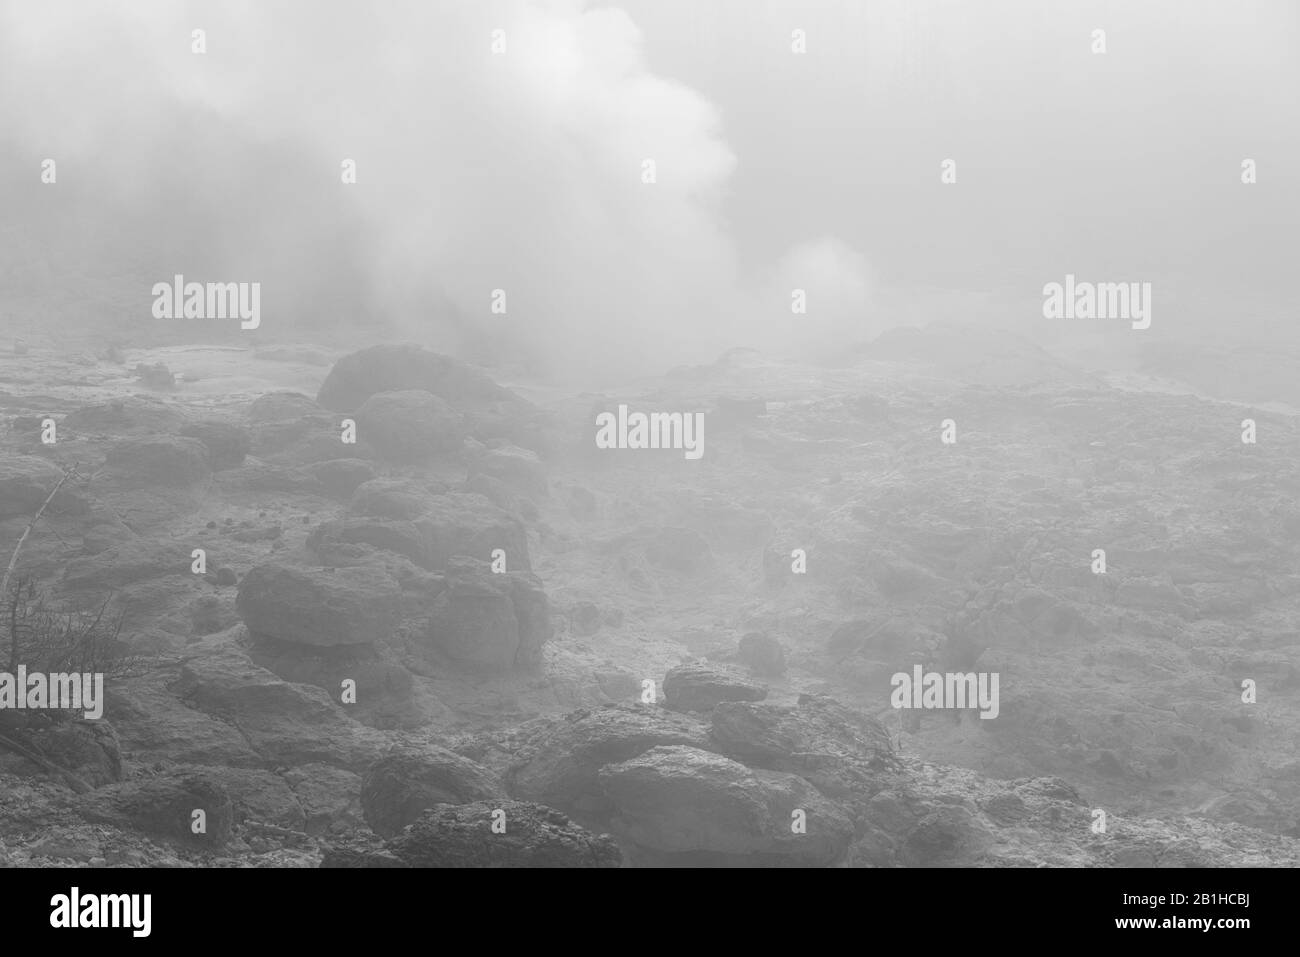 Hot gases venting from alien looking landscape, gives the viewer a feeling of dread. Stock Photo